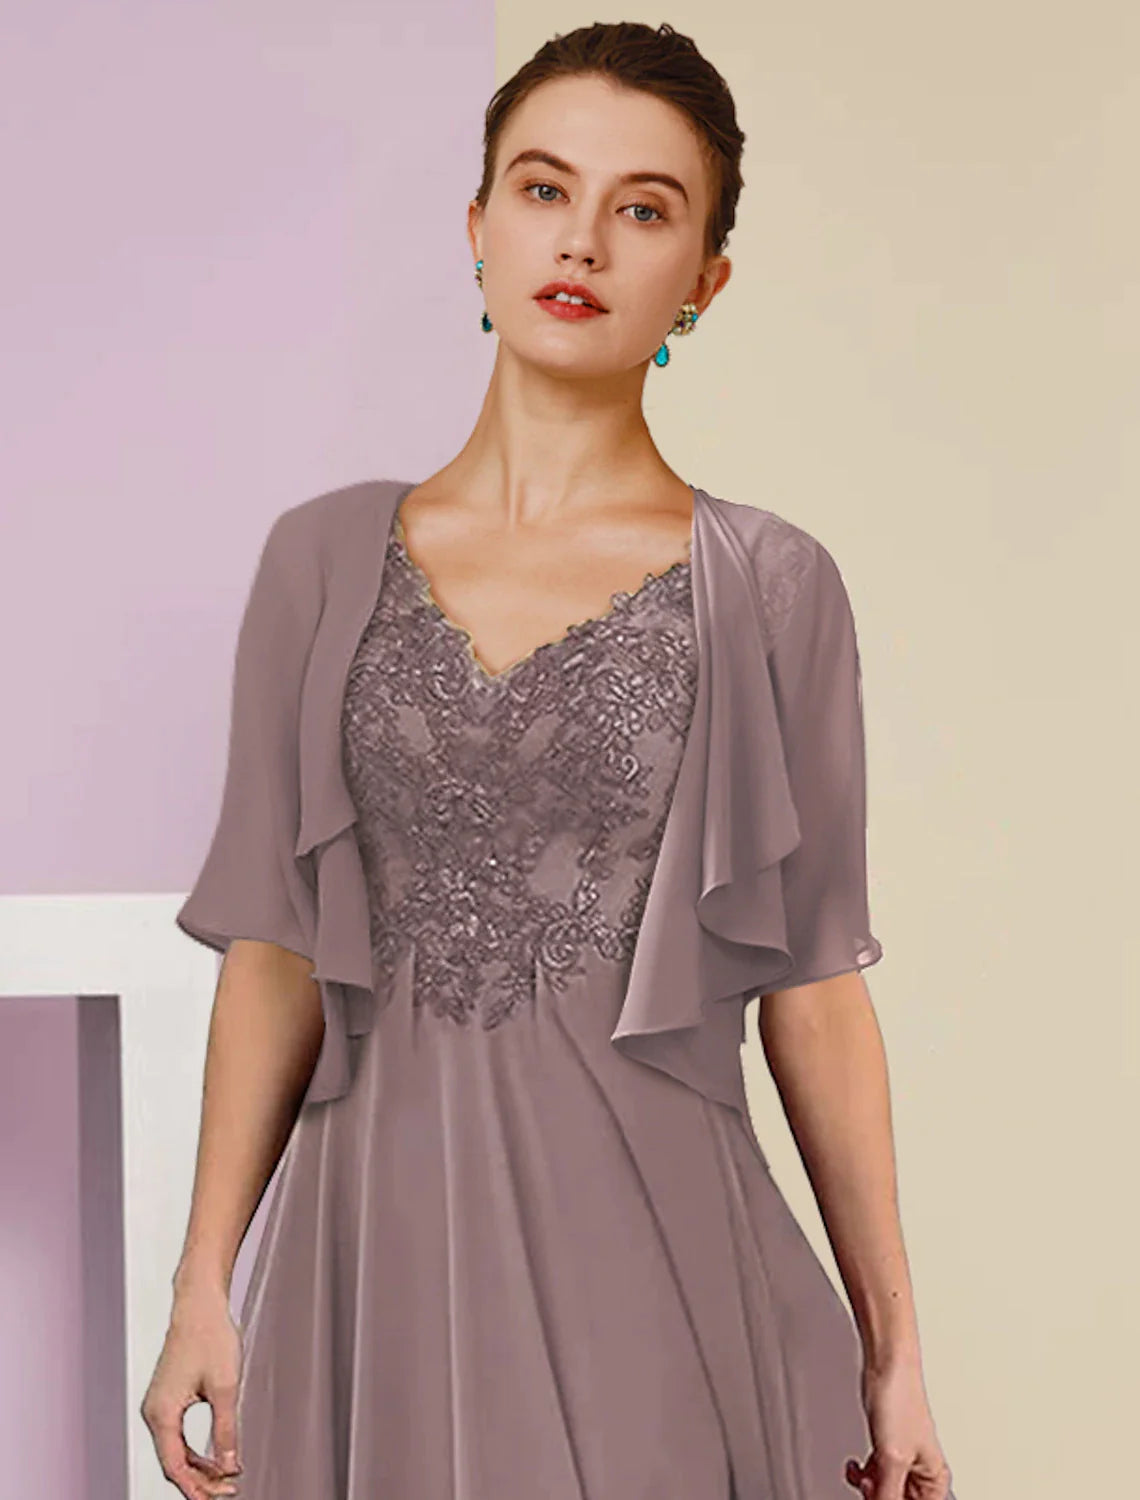 Two Piece A-Line Mother of the Bride Dress Formal Fall Wedding Guest Elegant V Neck Tea Length Lace Short Sleeve Wrap Included with Pleats Appliques